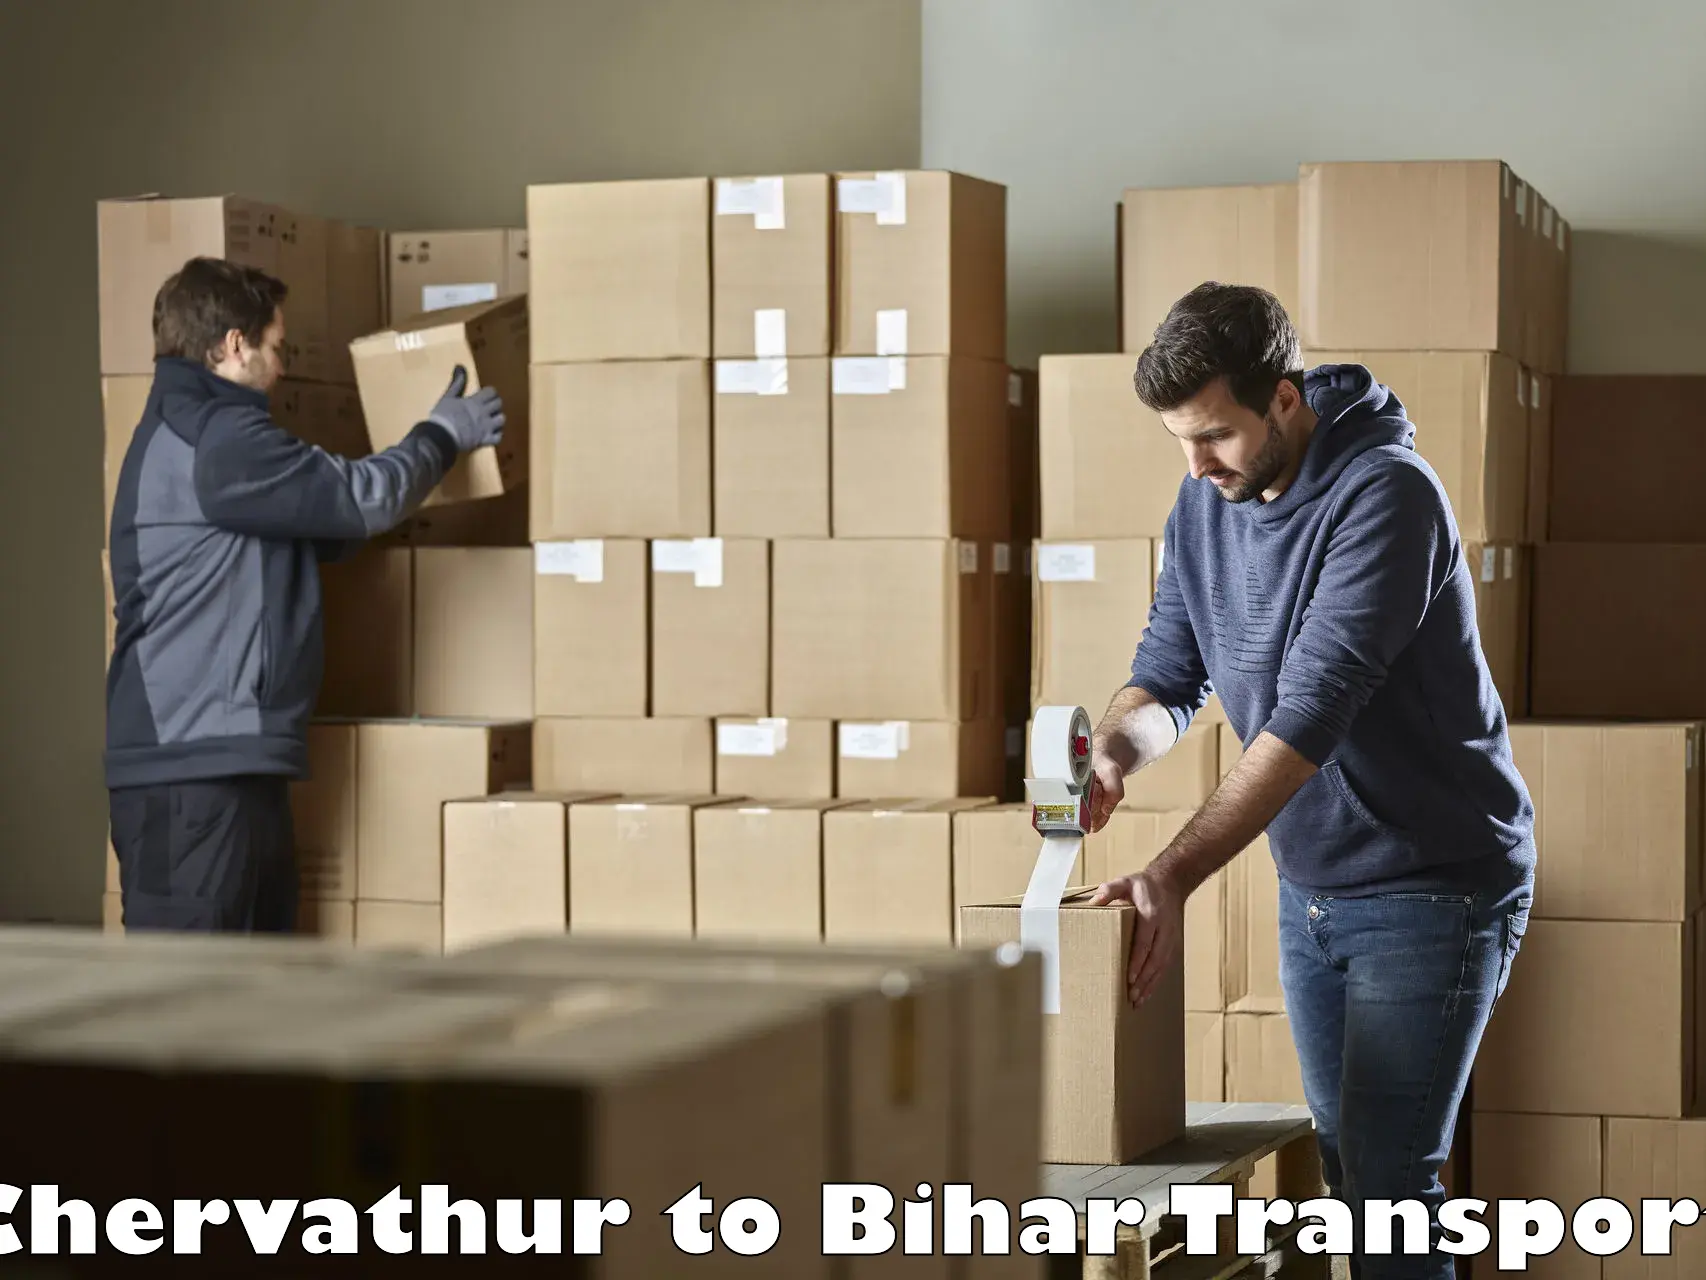 Shipping services Chervathur to Jhajha